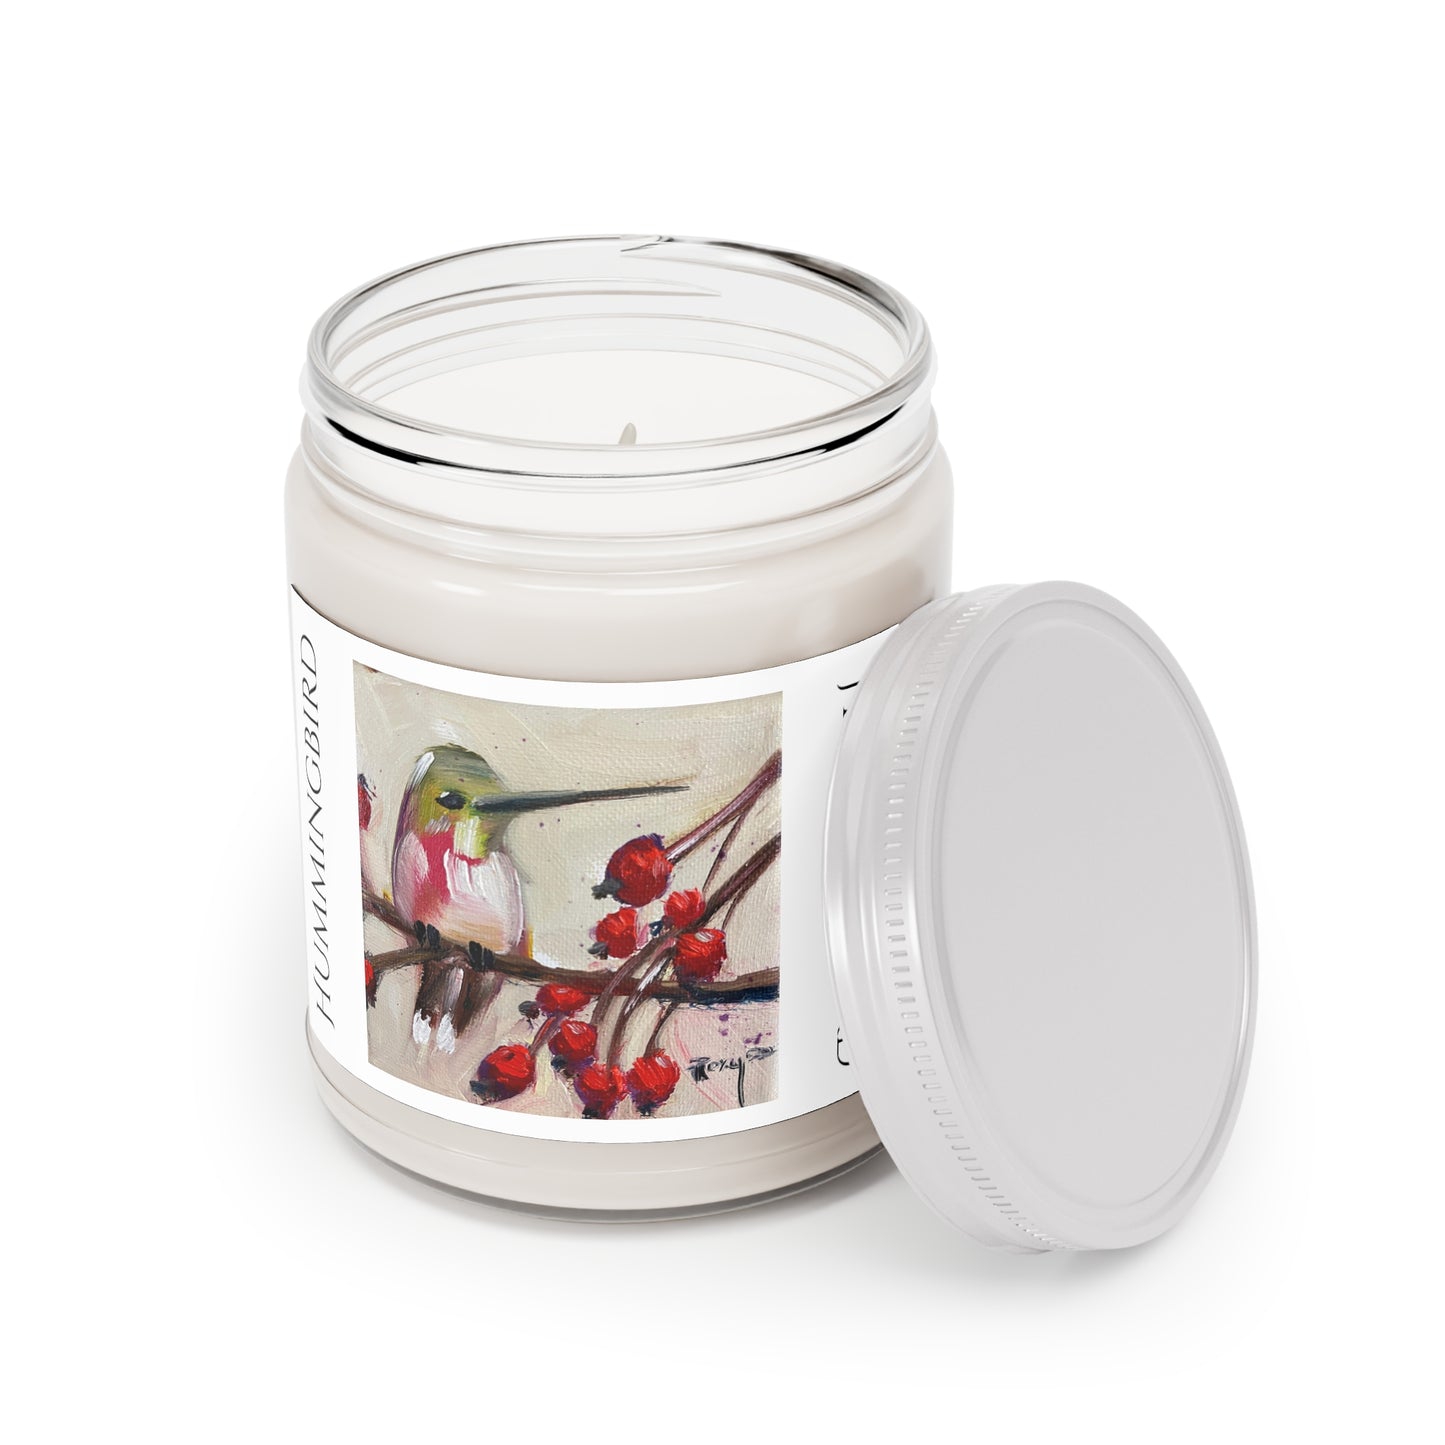 Hummingbird with Berries Scented Candle 9oz